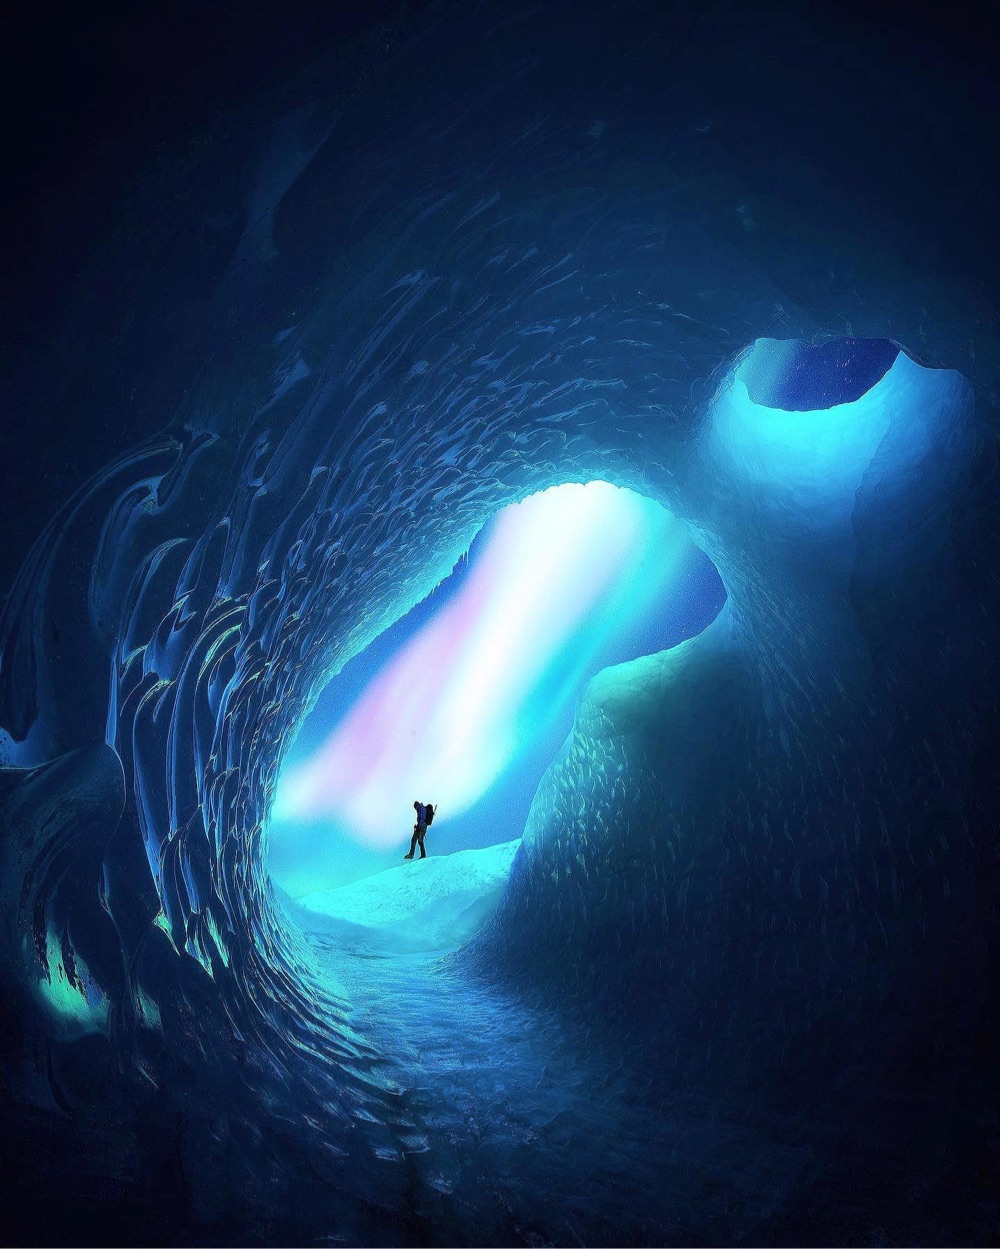 a lone figure stands silhouetted in the entrance of a blue ice cave with the northern lights behind them